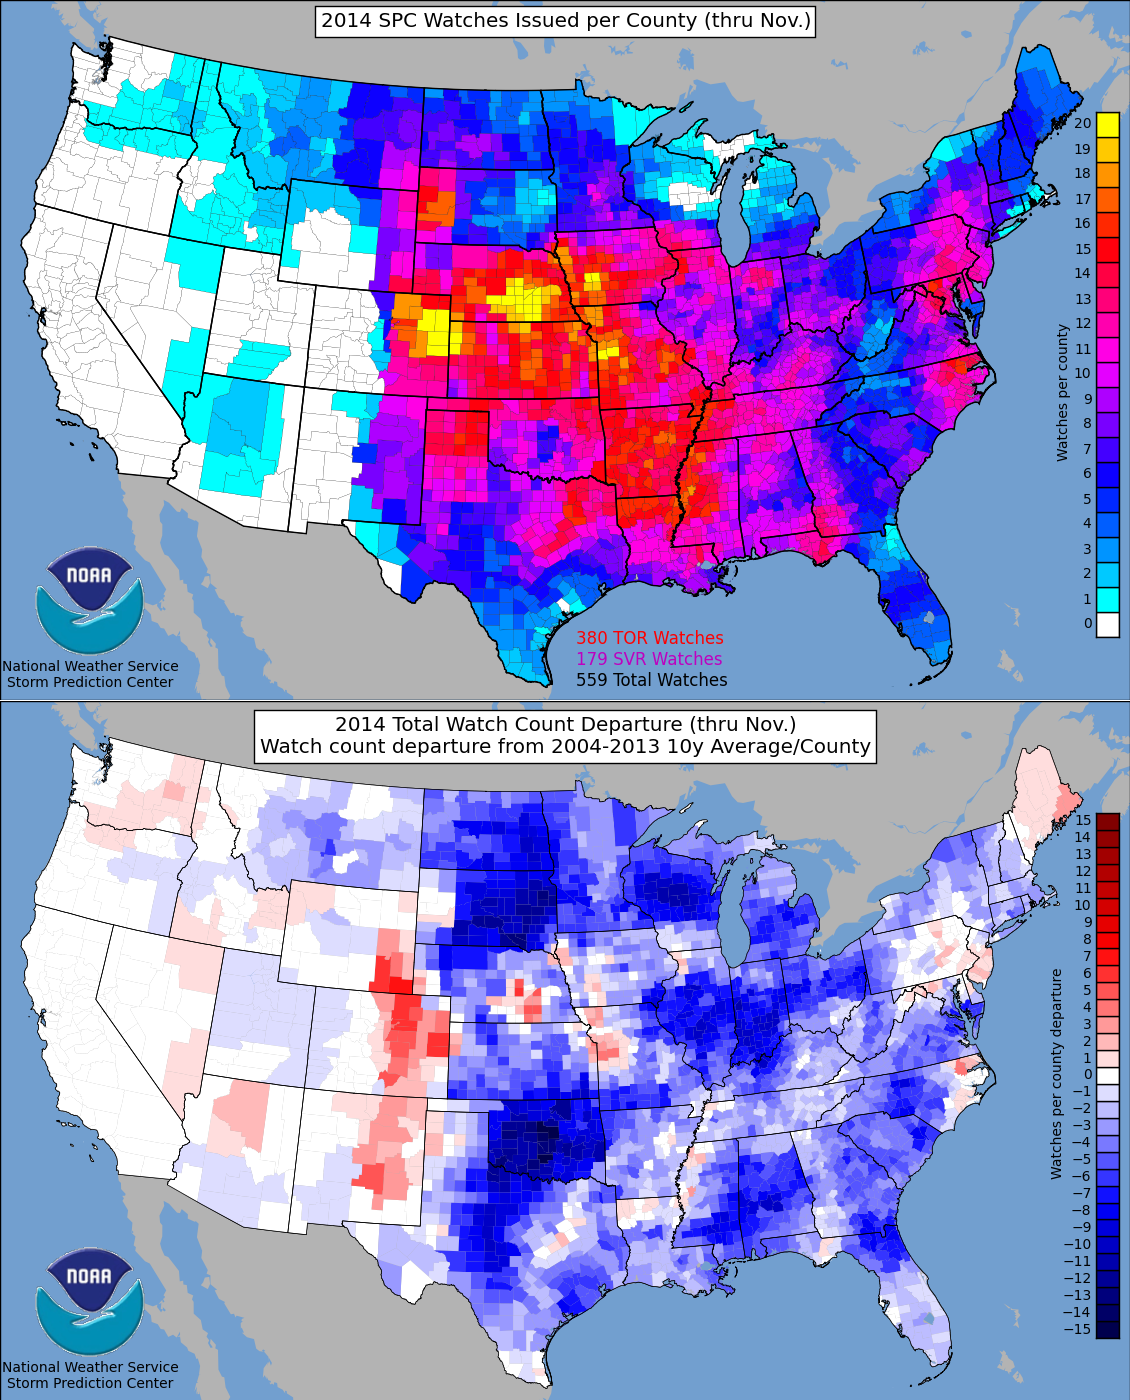 U.S. tornado watches issued in 2014 and the departure from the 10 year normal